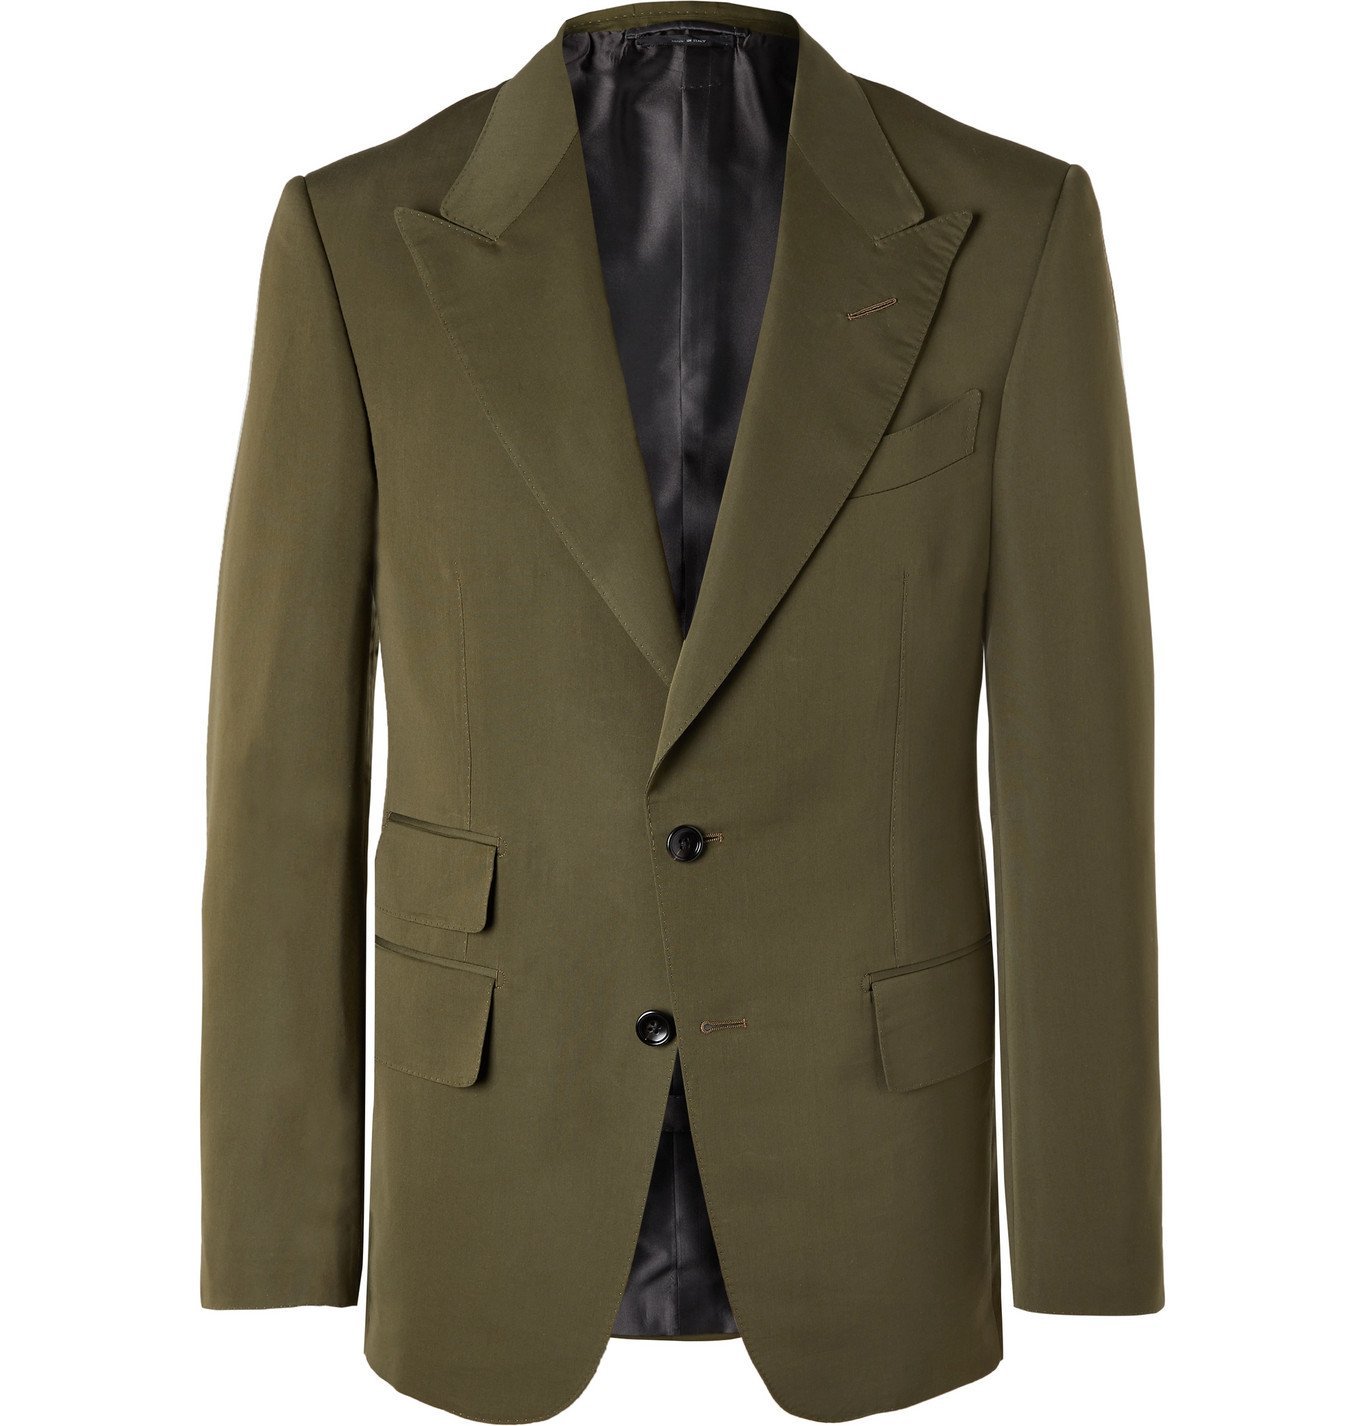 TOM FORD - Shelton Cotton and Silk-Blend Suit Jacket - Green TOM FORD